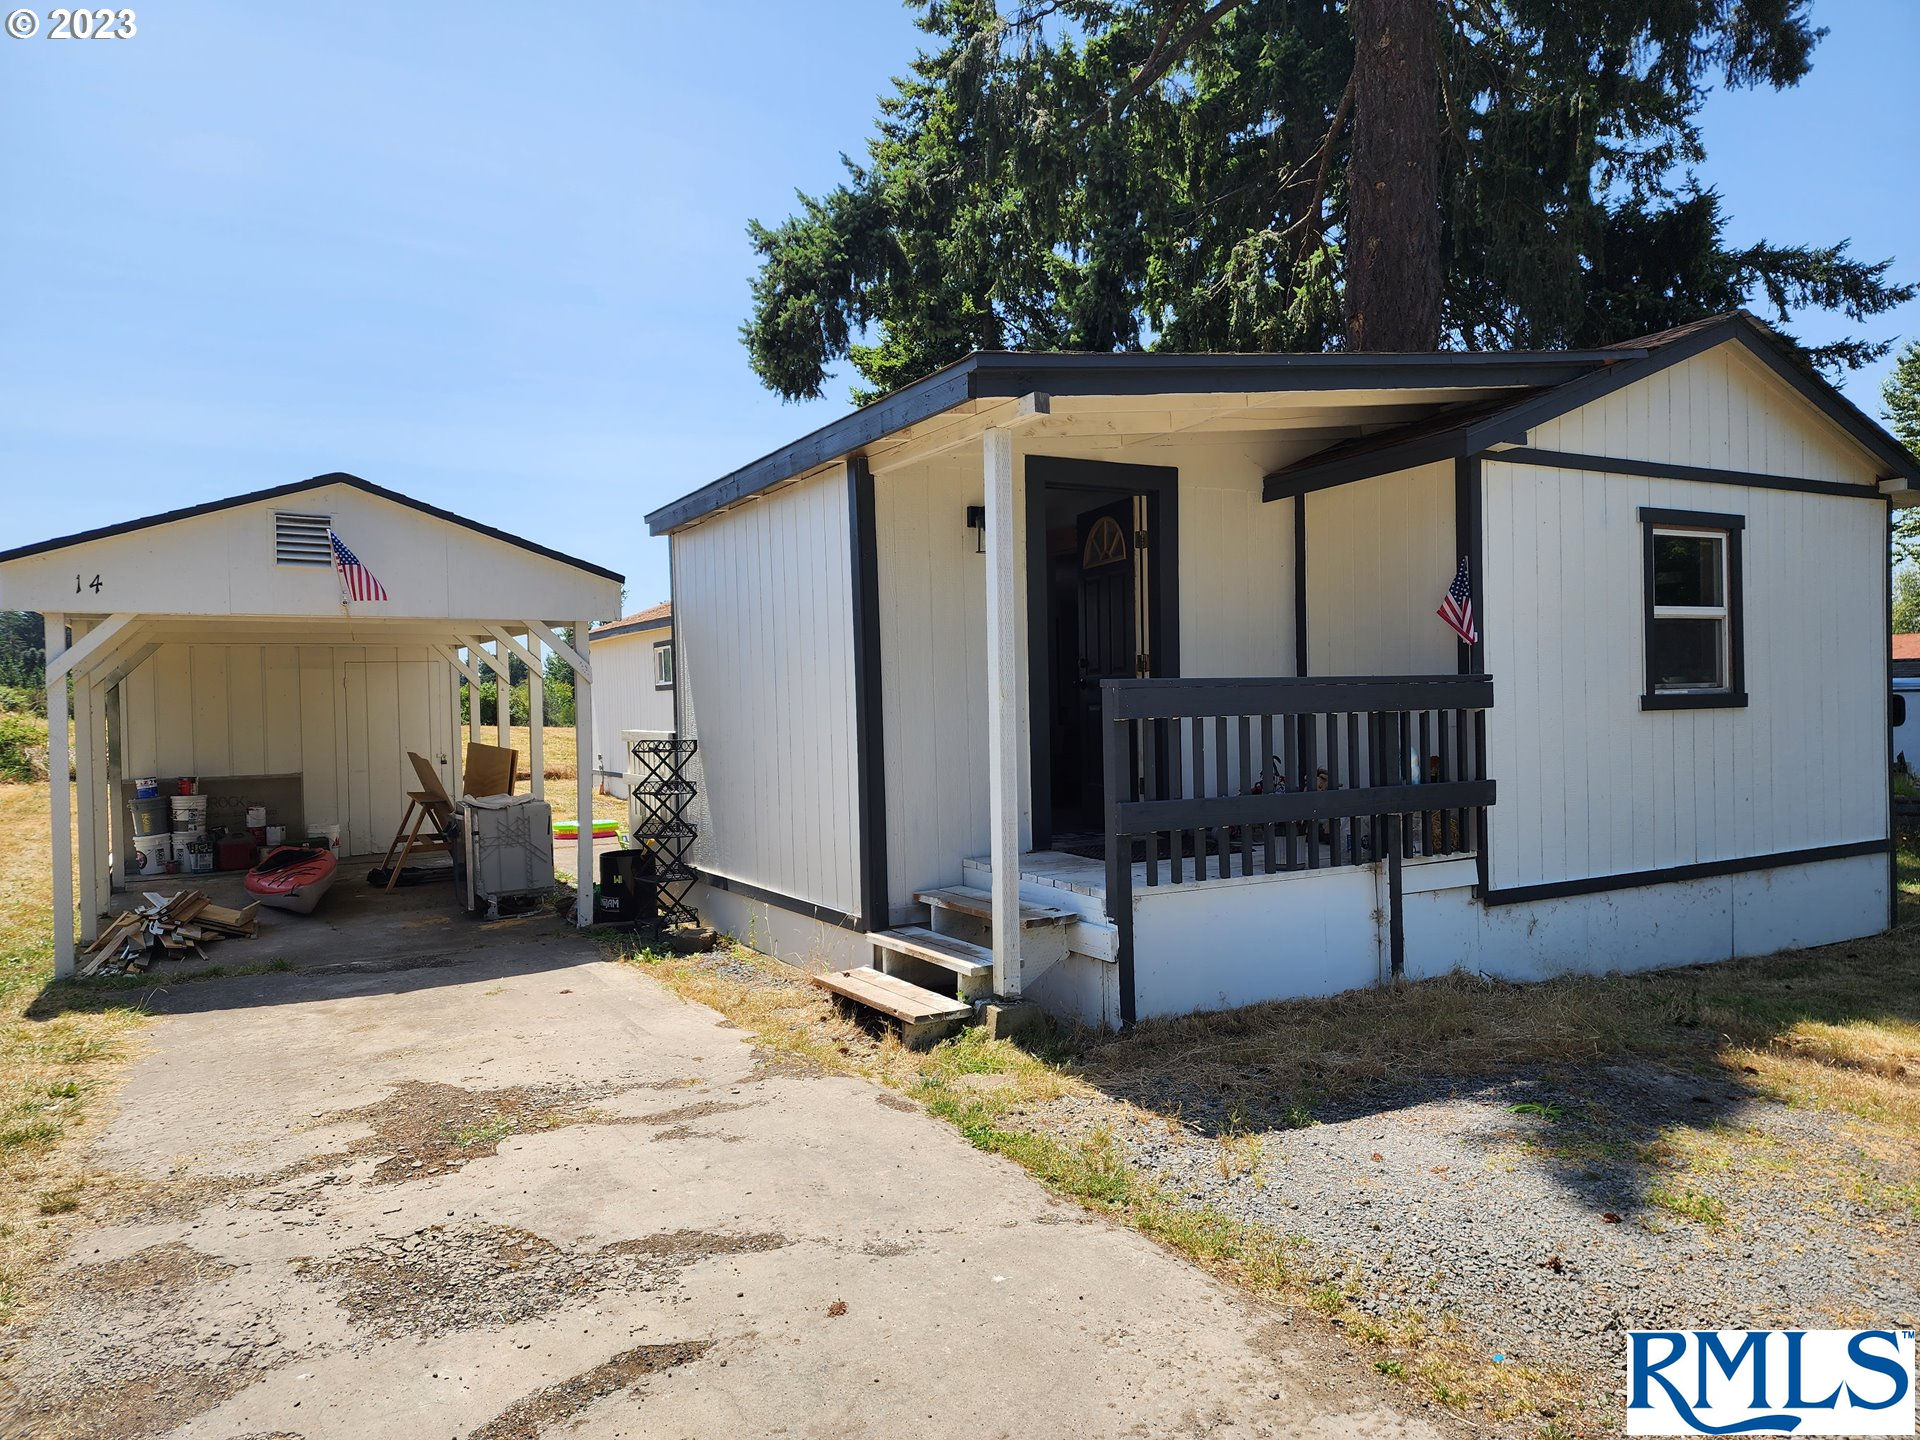 36451 S Sawtell Rd 14, Molalla, OR 97038